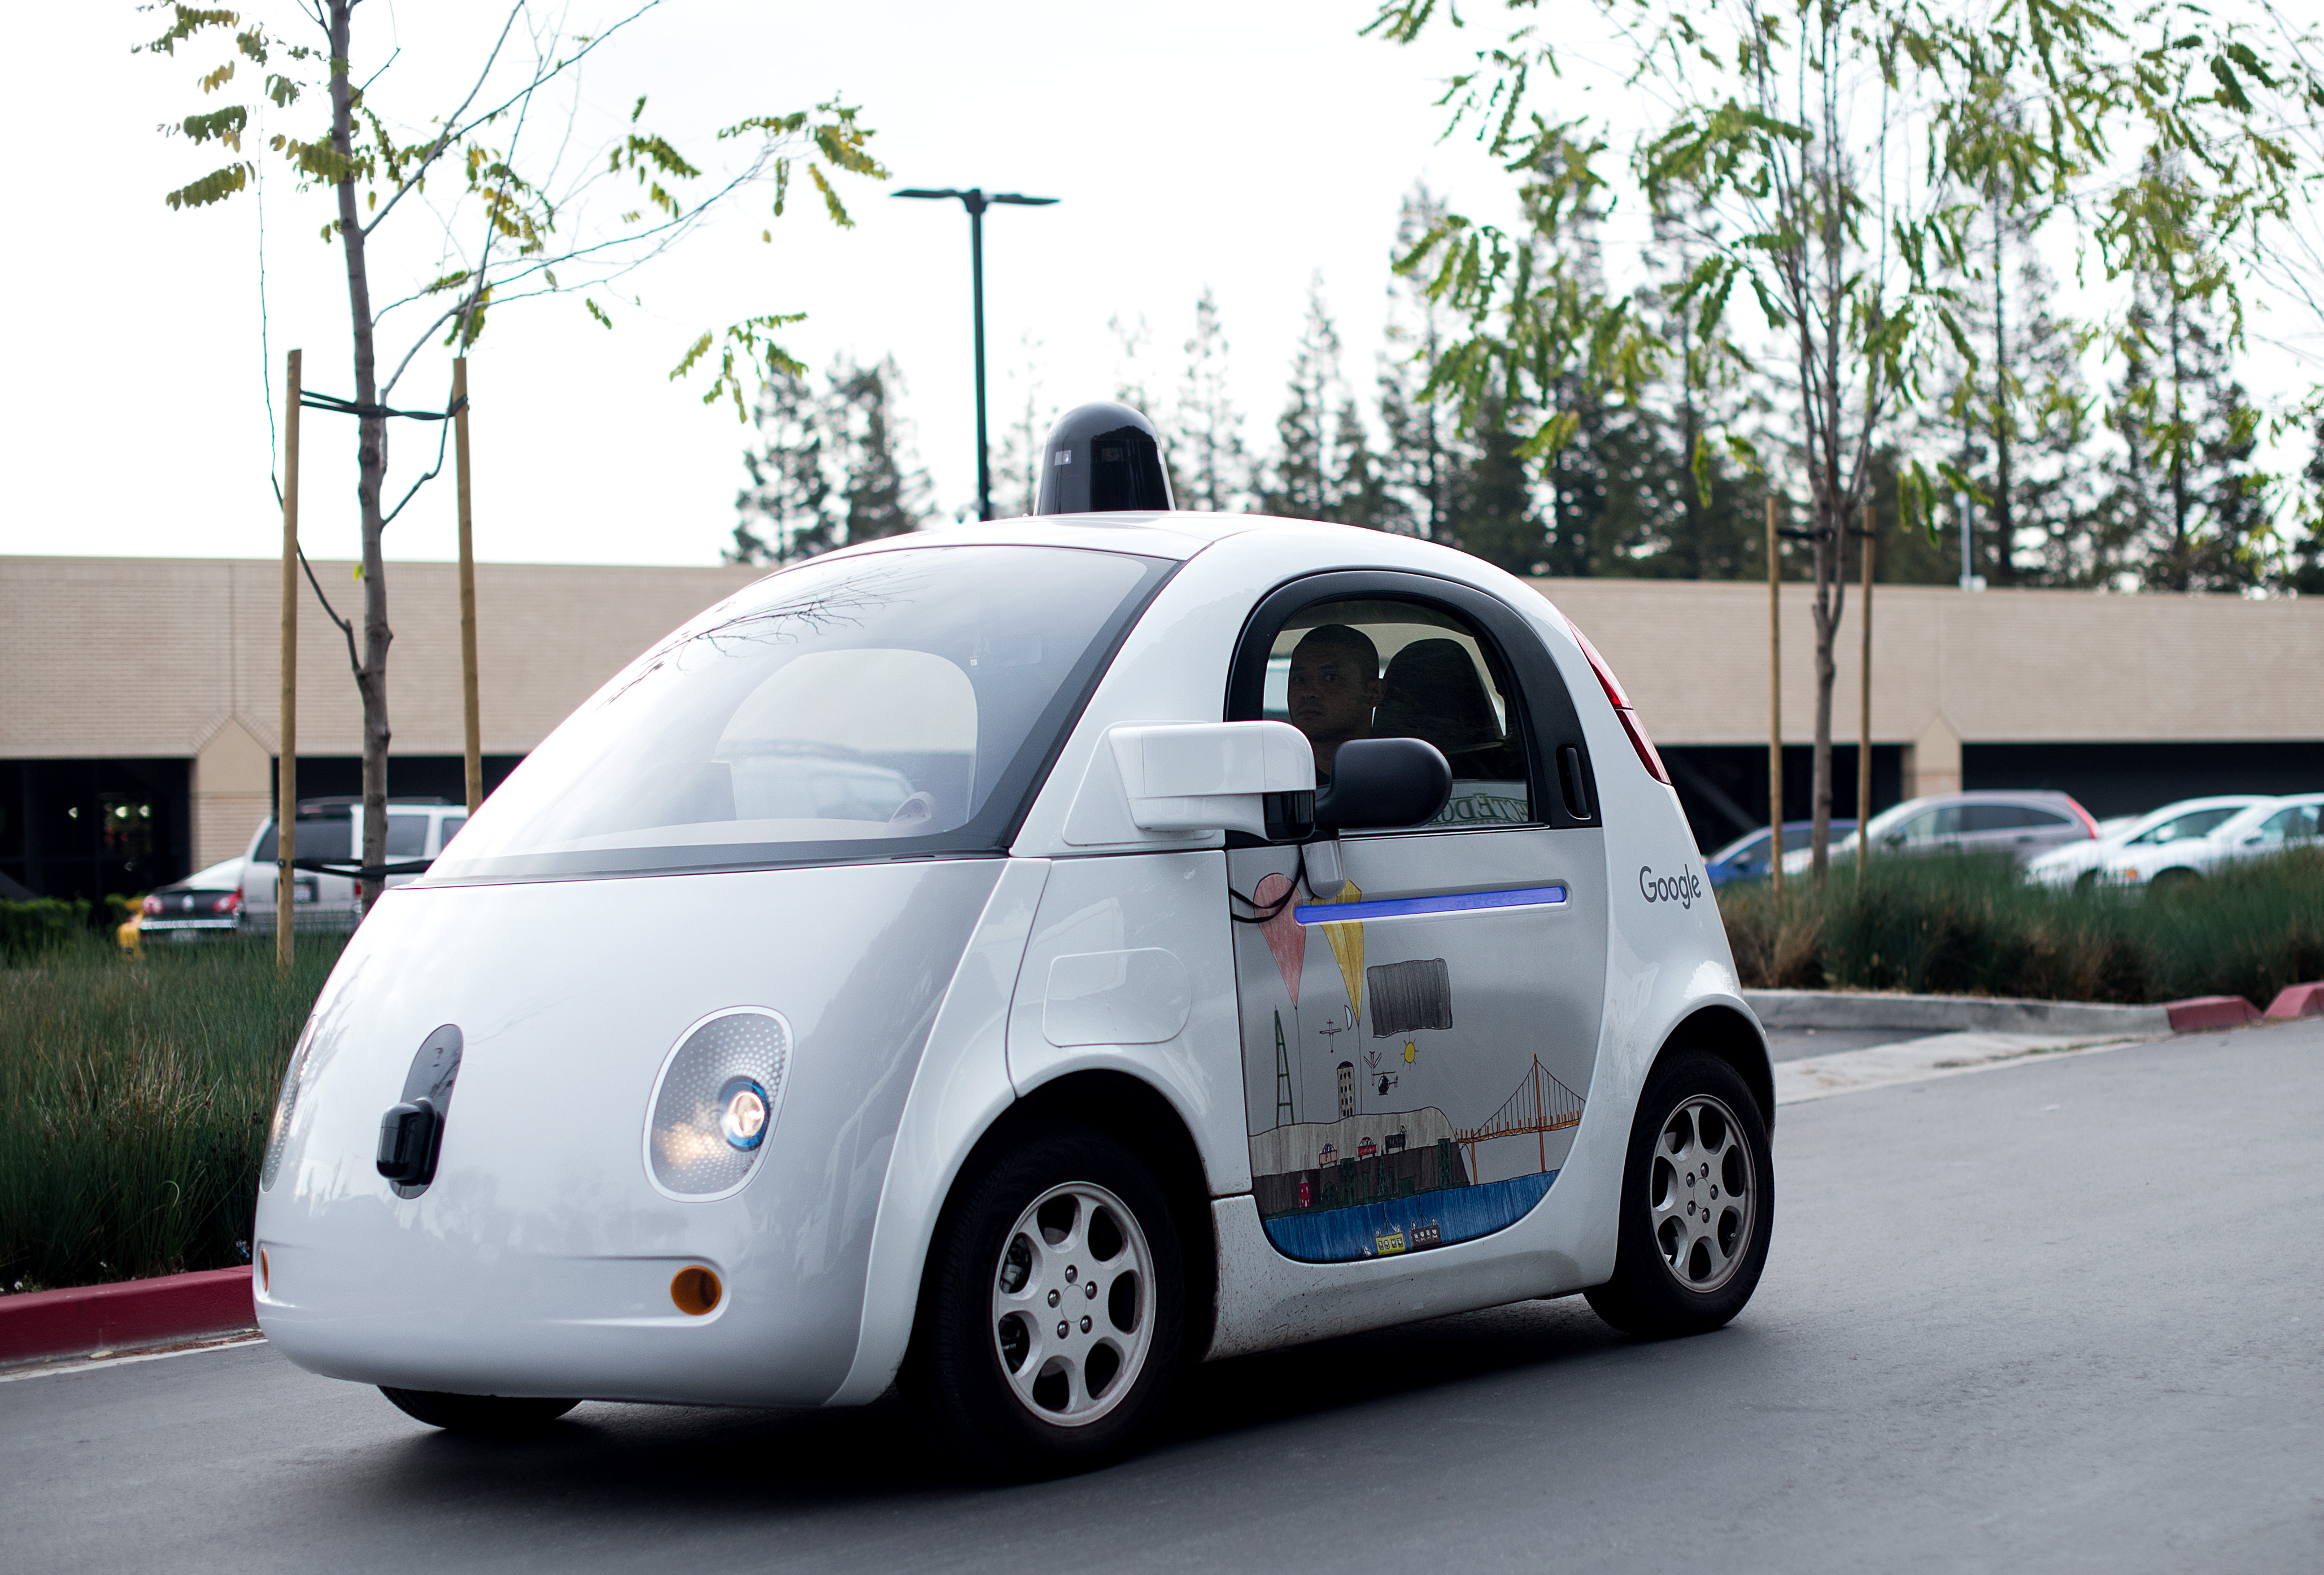 A self-driving car traverses a parking lot at Google's headquarters in Mountain View, California on Jan. 8, 2016 (Noah Berger—AFP/Getty Images)